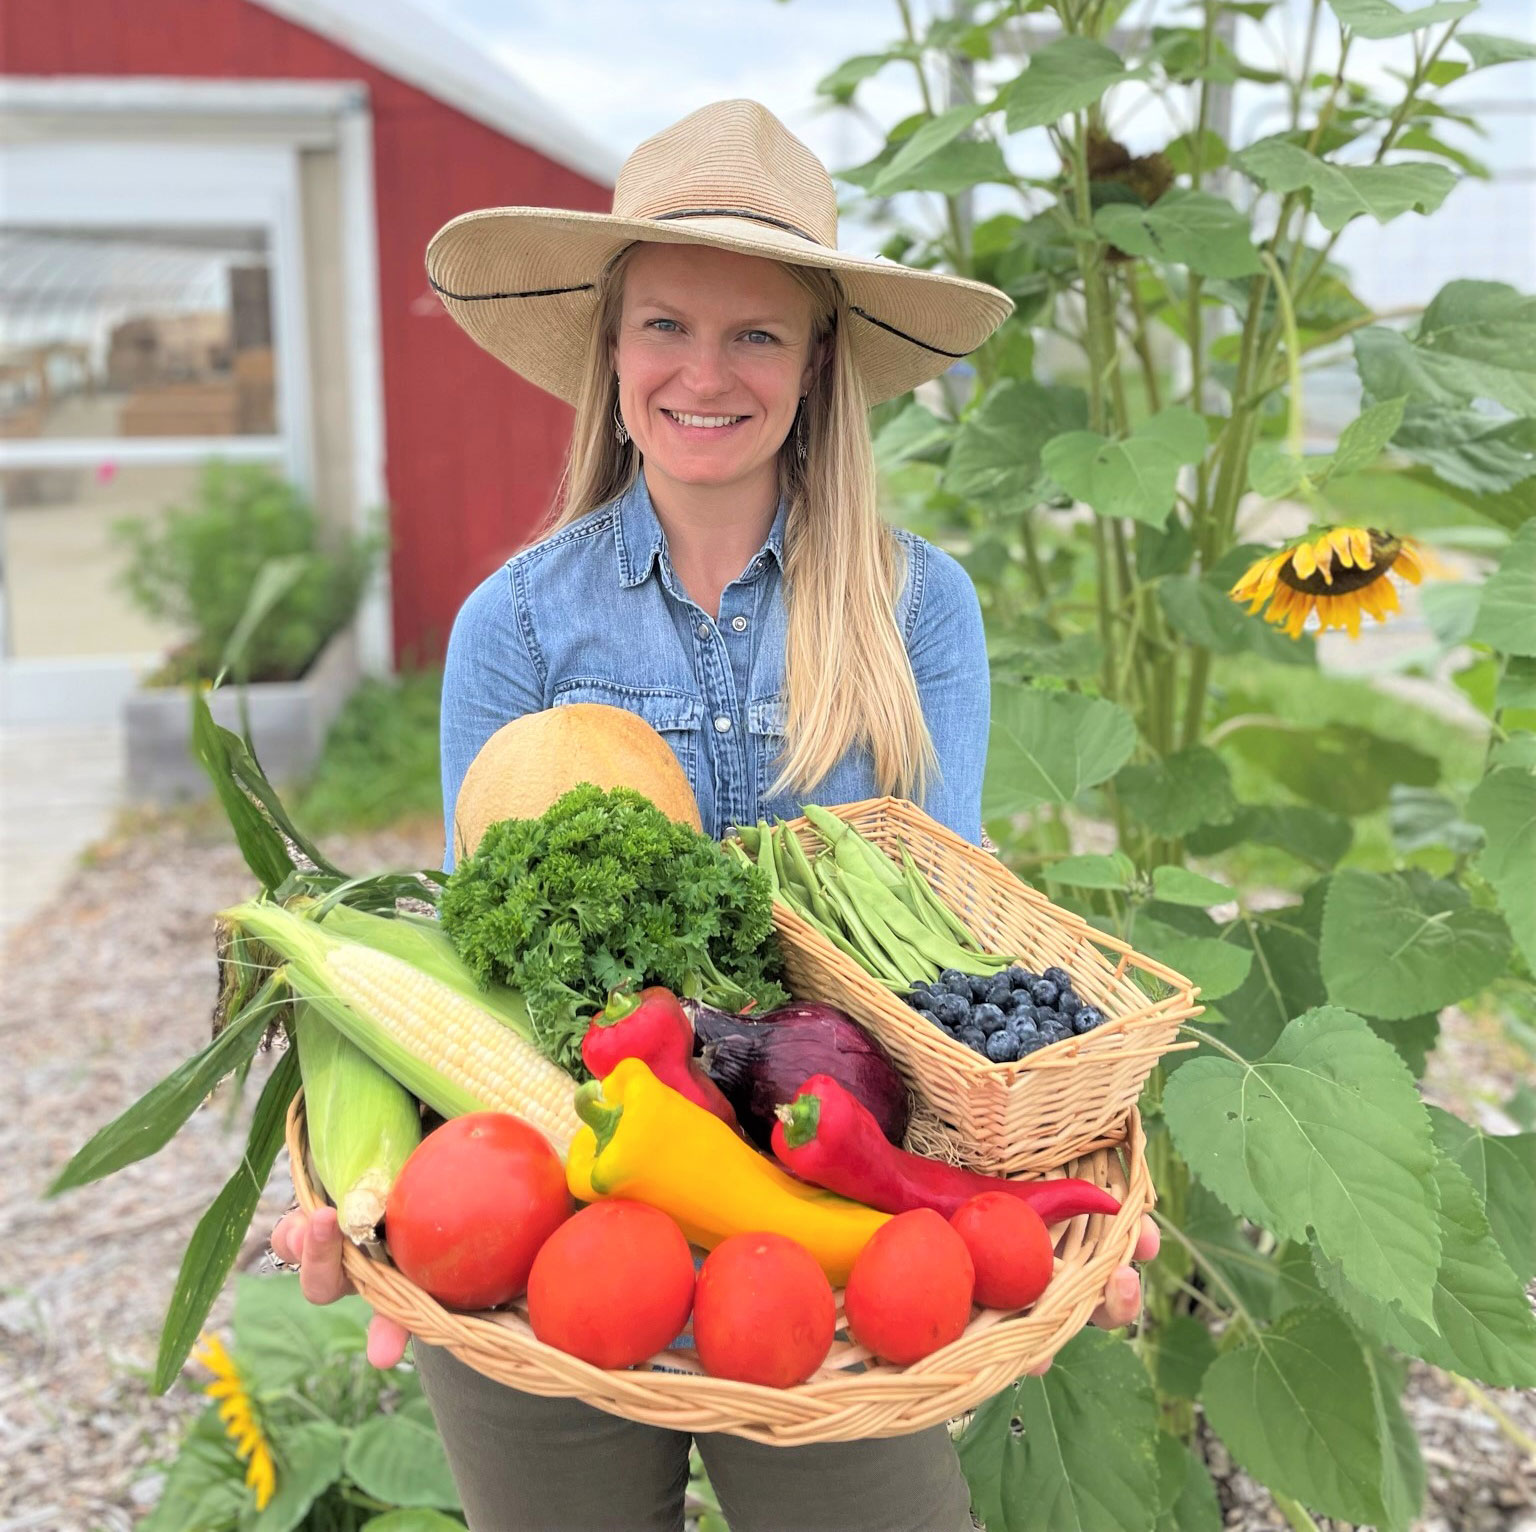 Amanda Sweetman wearing a wide-brimmed straw hat holding a basket of vegetables with sunflowers in the background